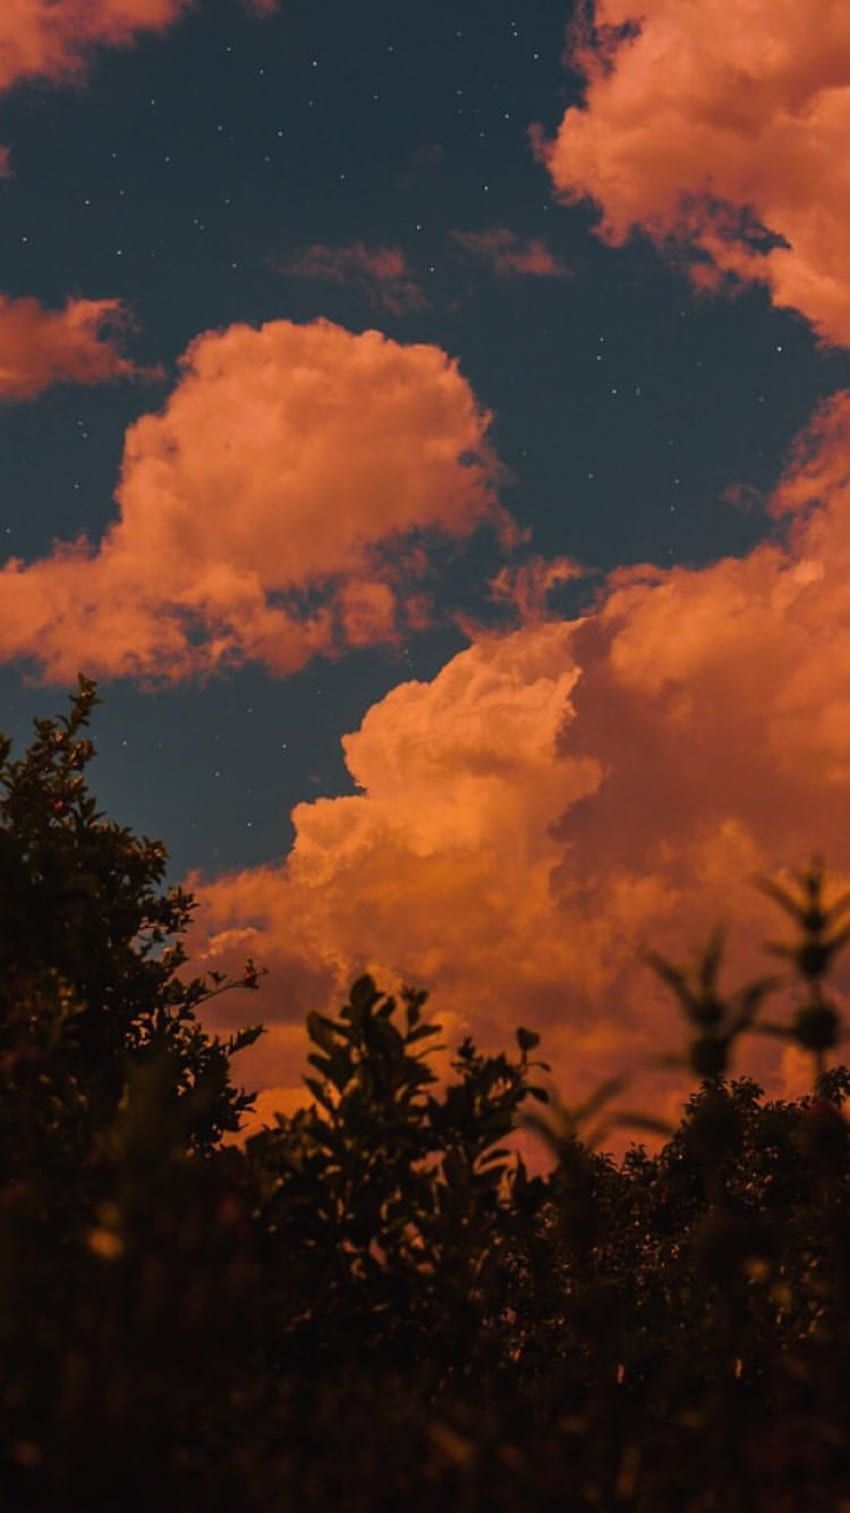 A beautiful sunset with a cloudy sky and a few stars visible in the sky. - Orange, dark orange, pastel orange, vintage clouds